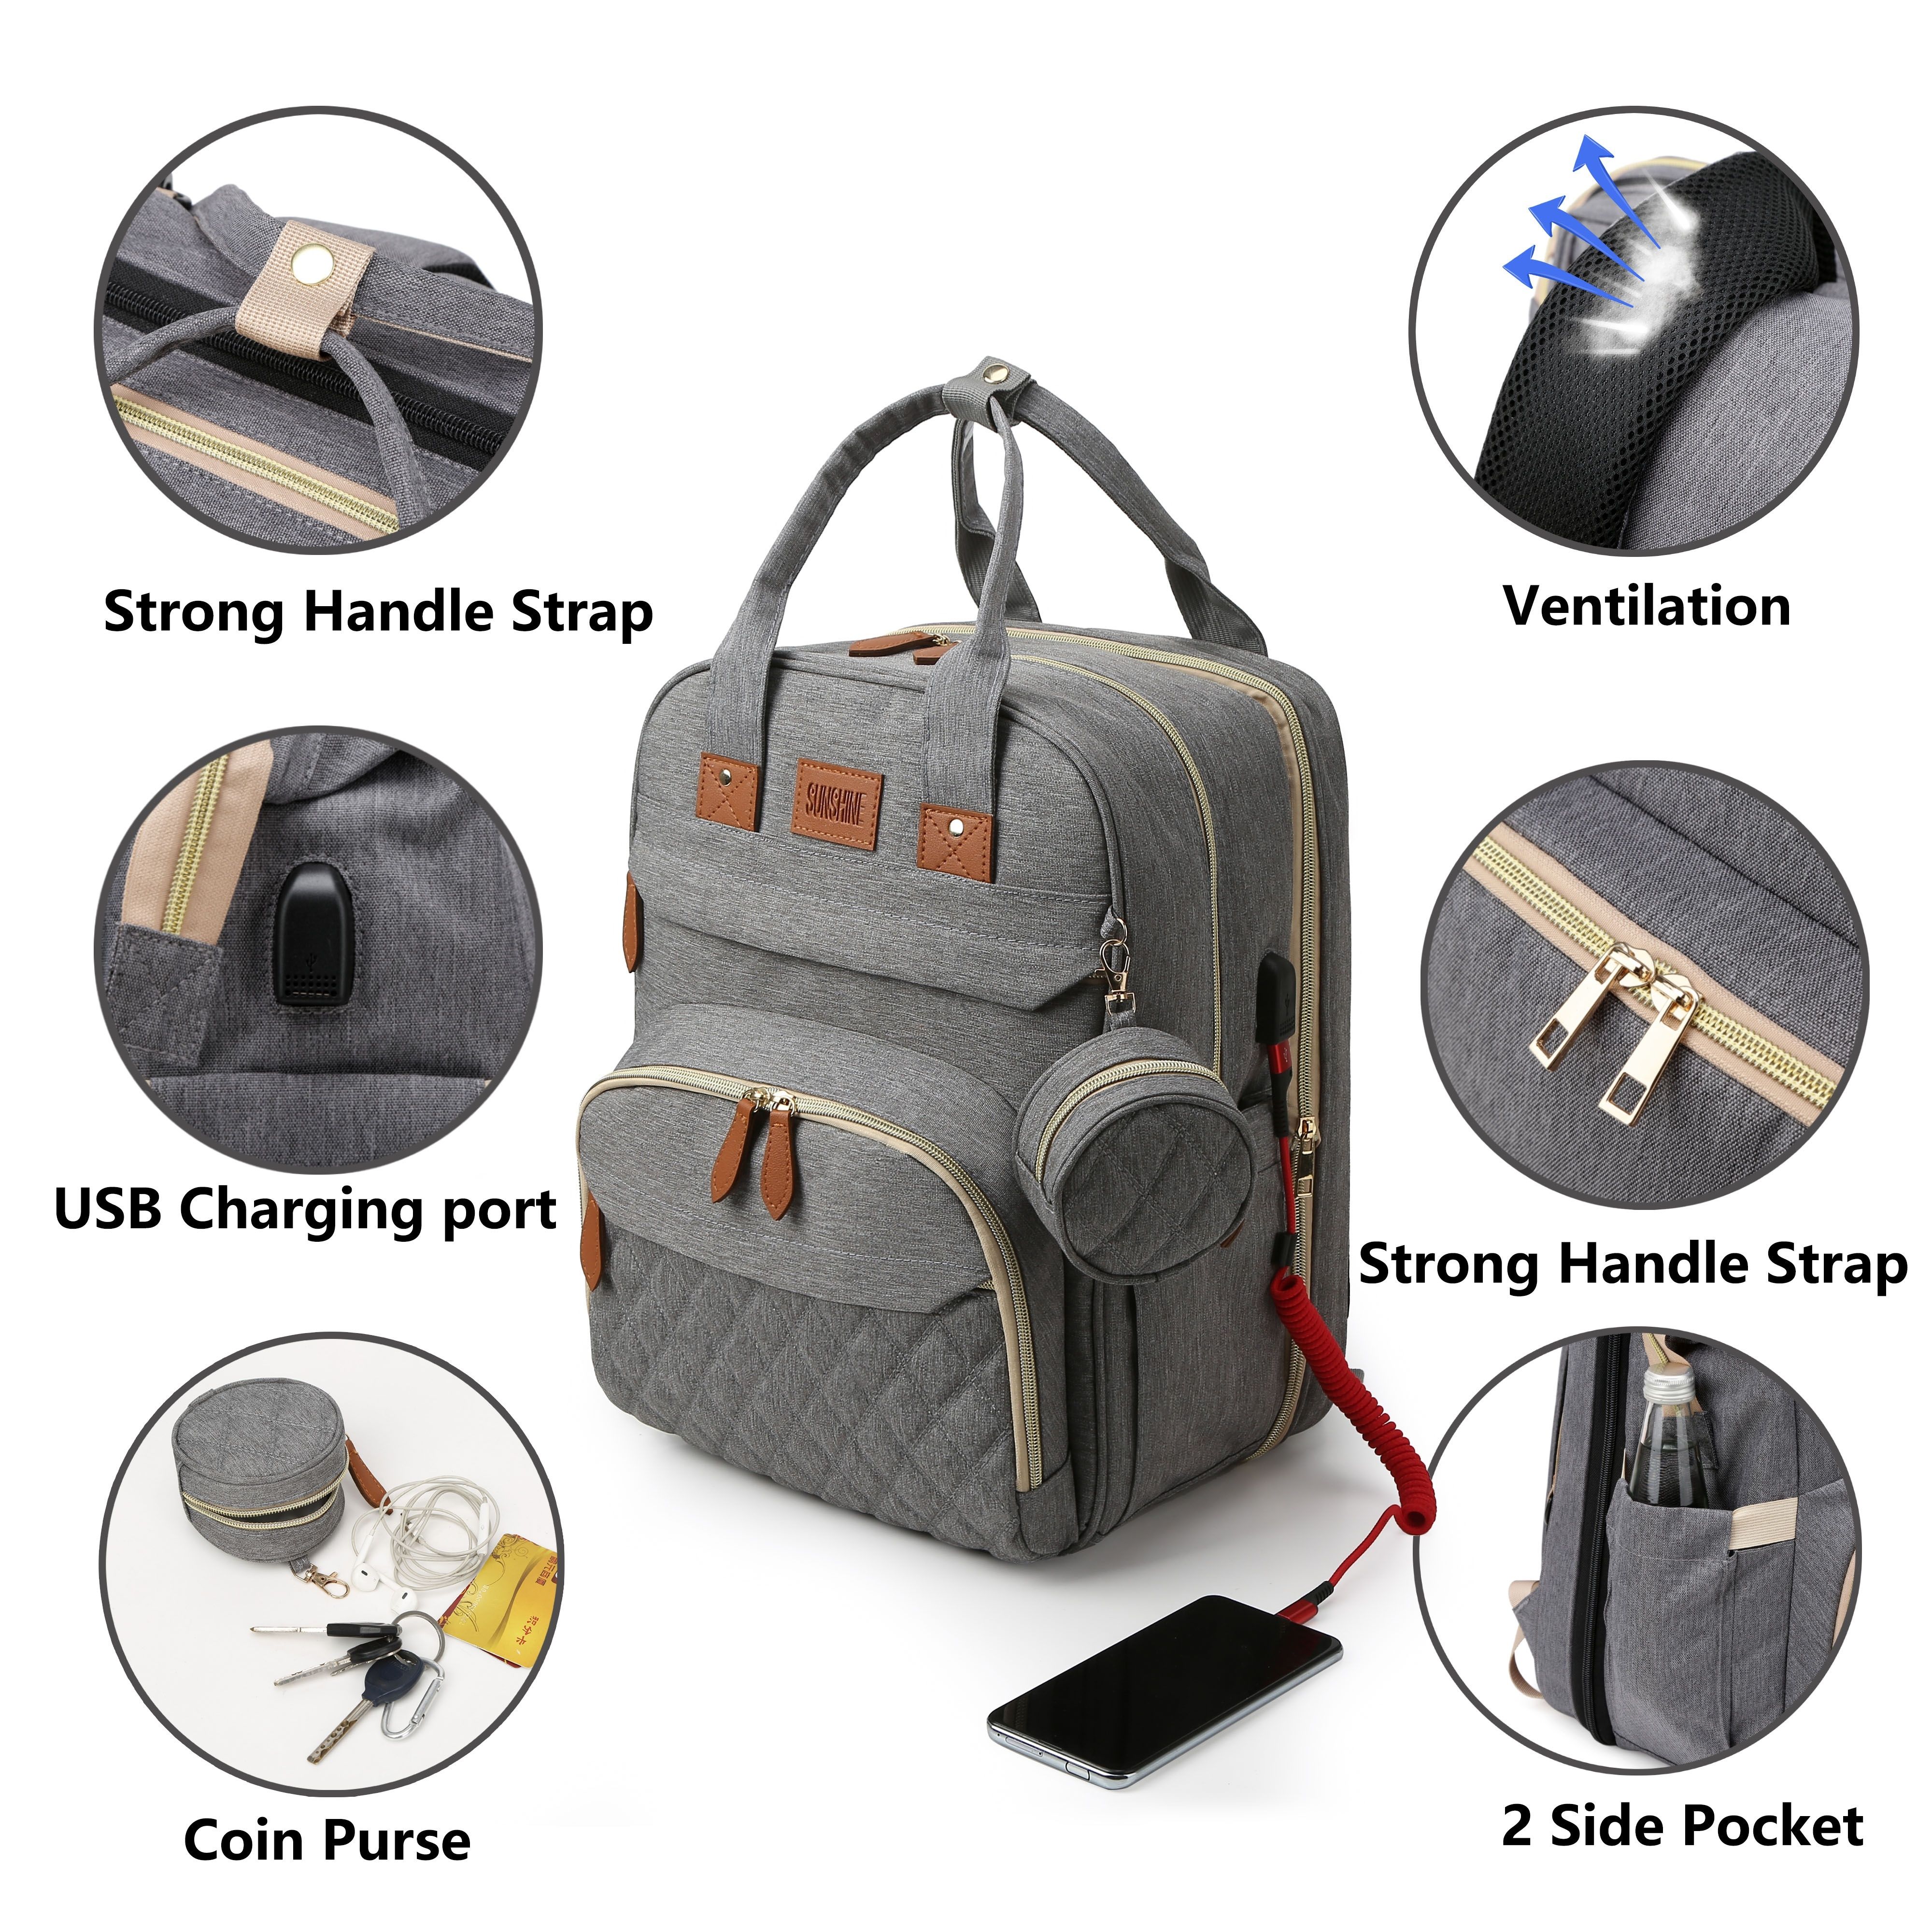 diaper bag backpack diaper changing station with usb charging port multi functional mom travel baby diaper bag large capacity diaper backpack with changing pad baby bag for moms dads baby registry search shower gifts waterproof and stylish details 0